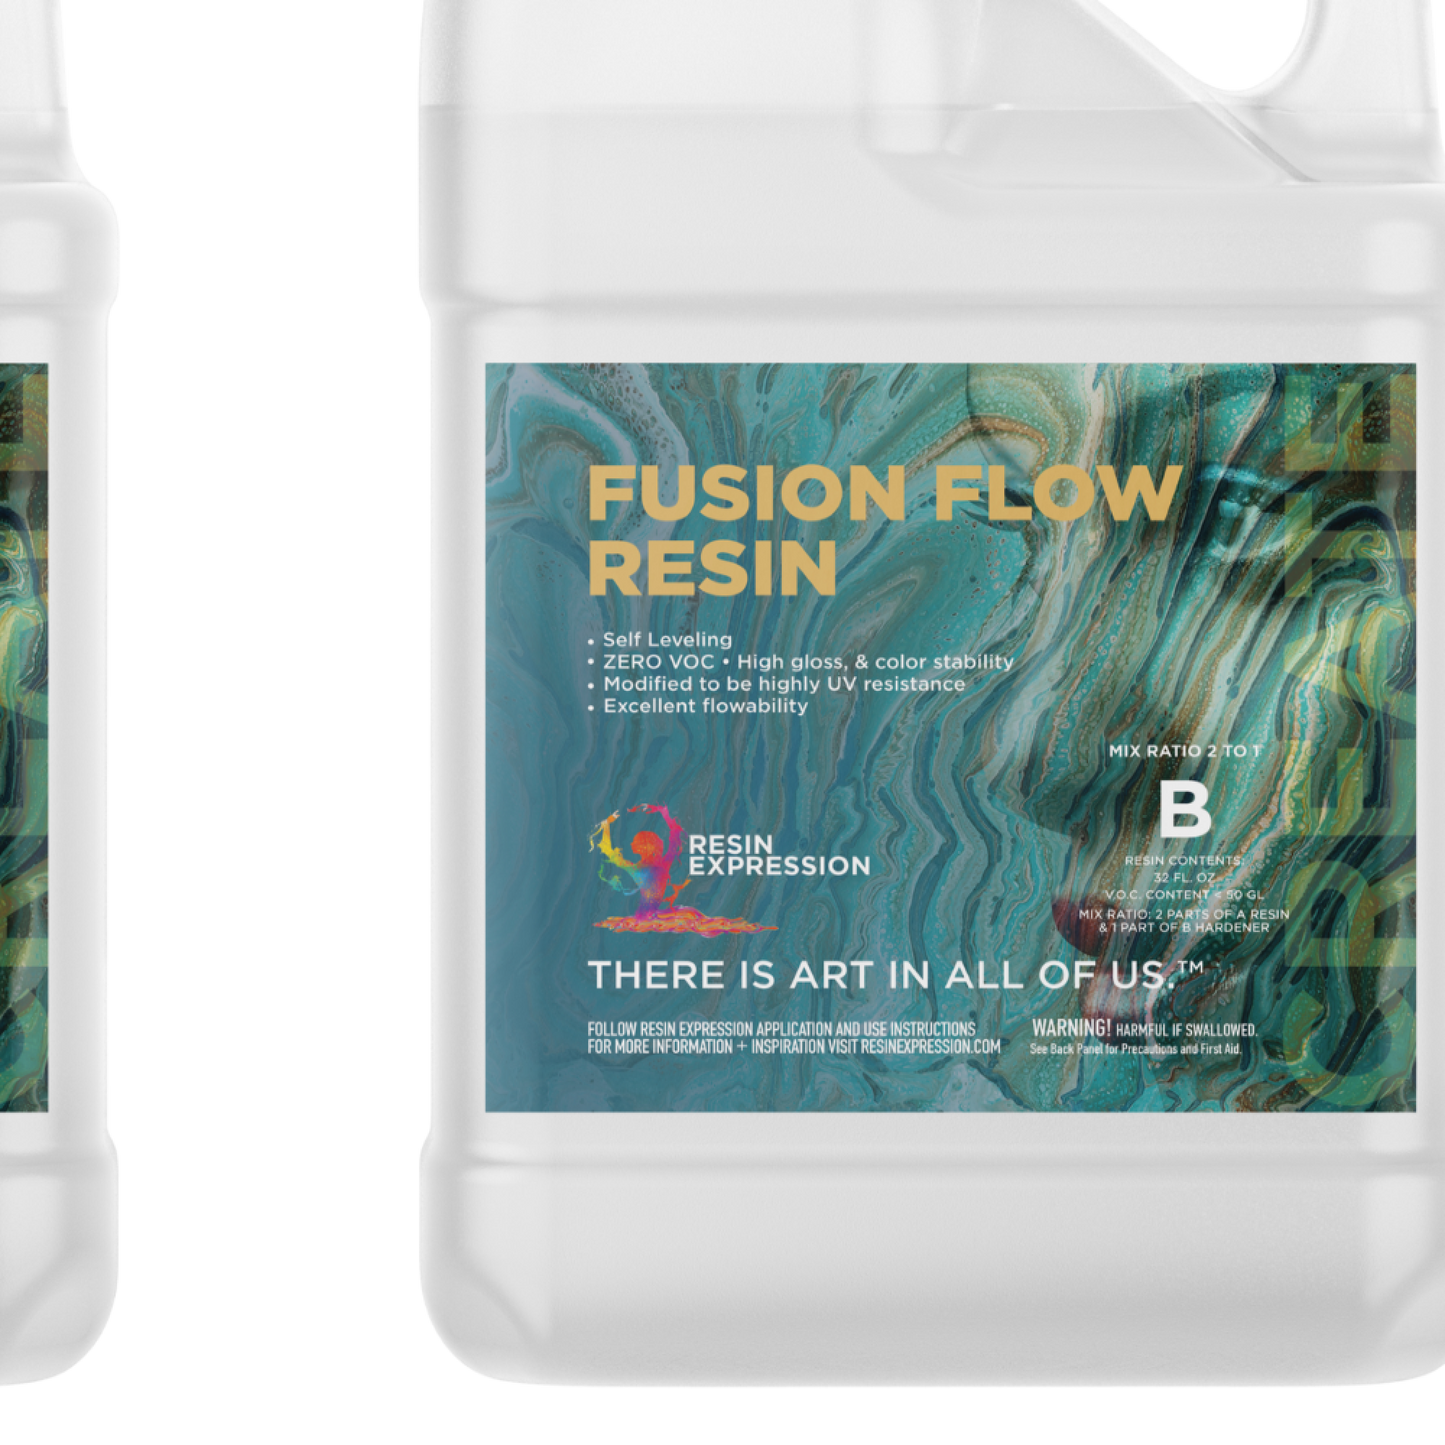 Fluid Design: Achieve stunning results with Fusion Flow Resin